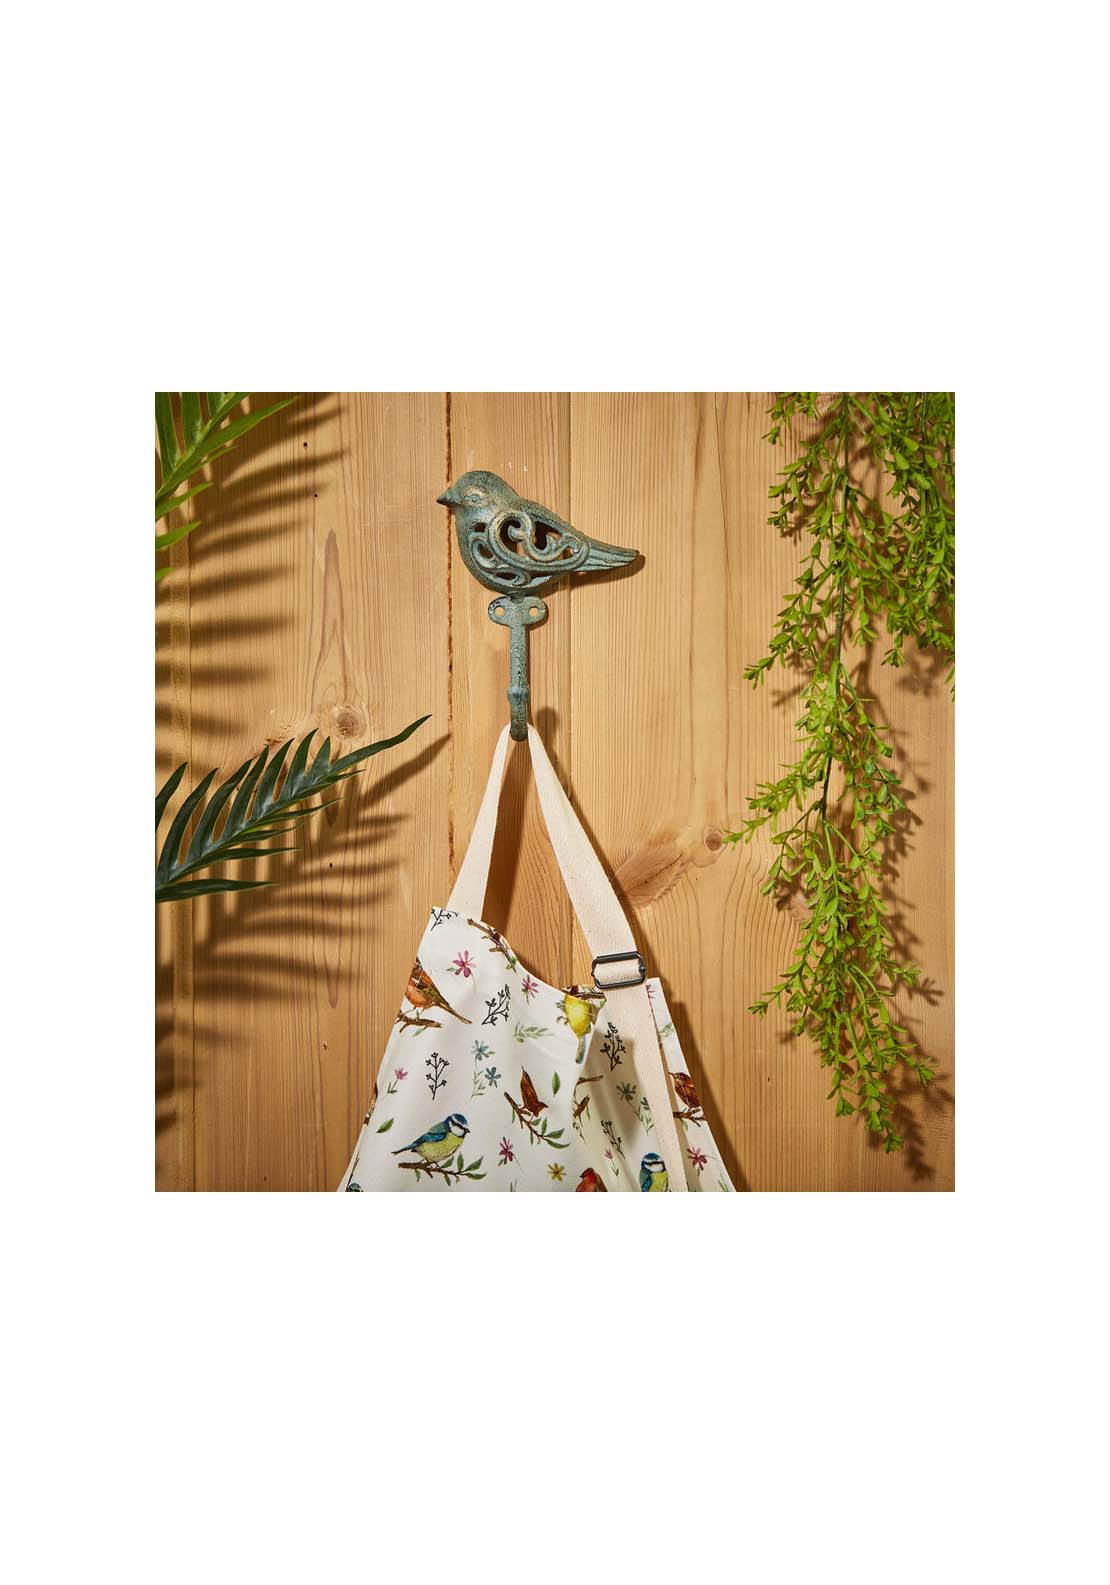 The Home Collection Iron Verdigris Bird Hook 1 Shaws Department Stores